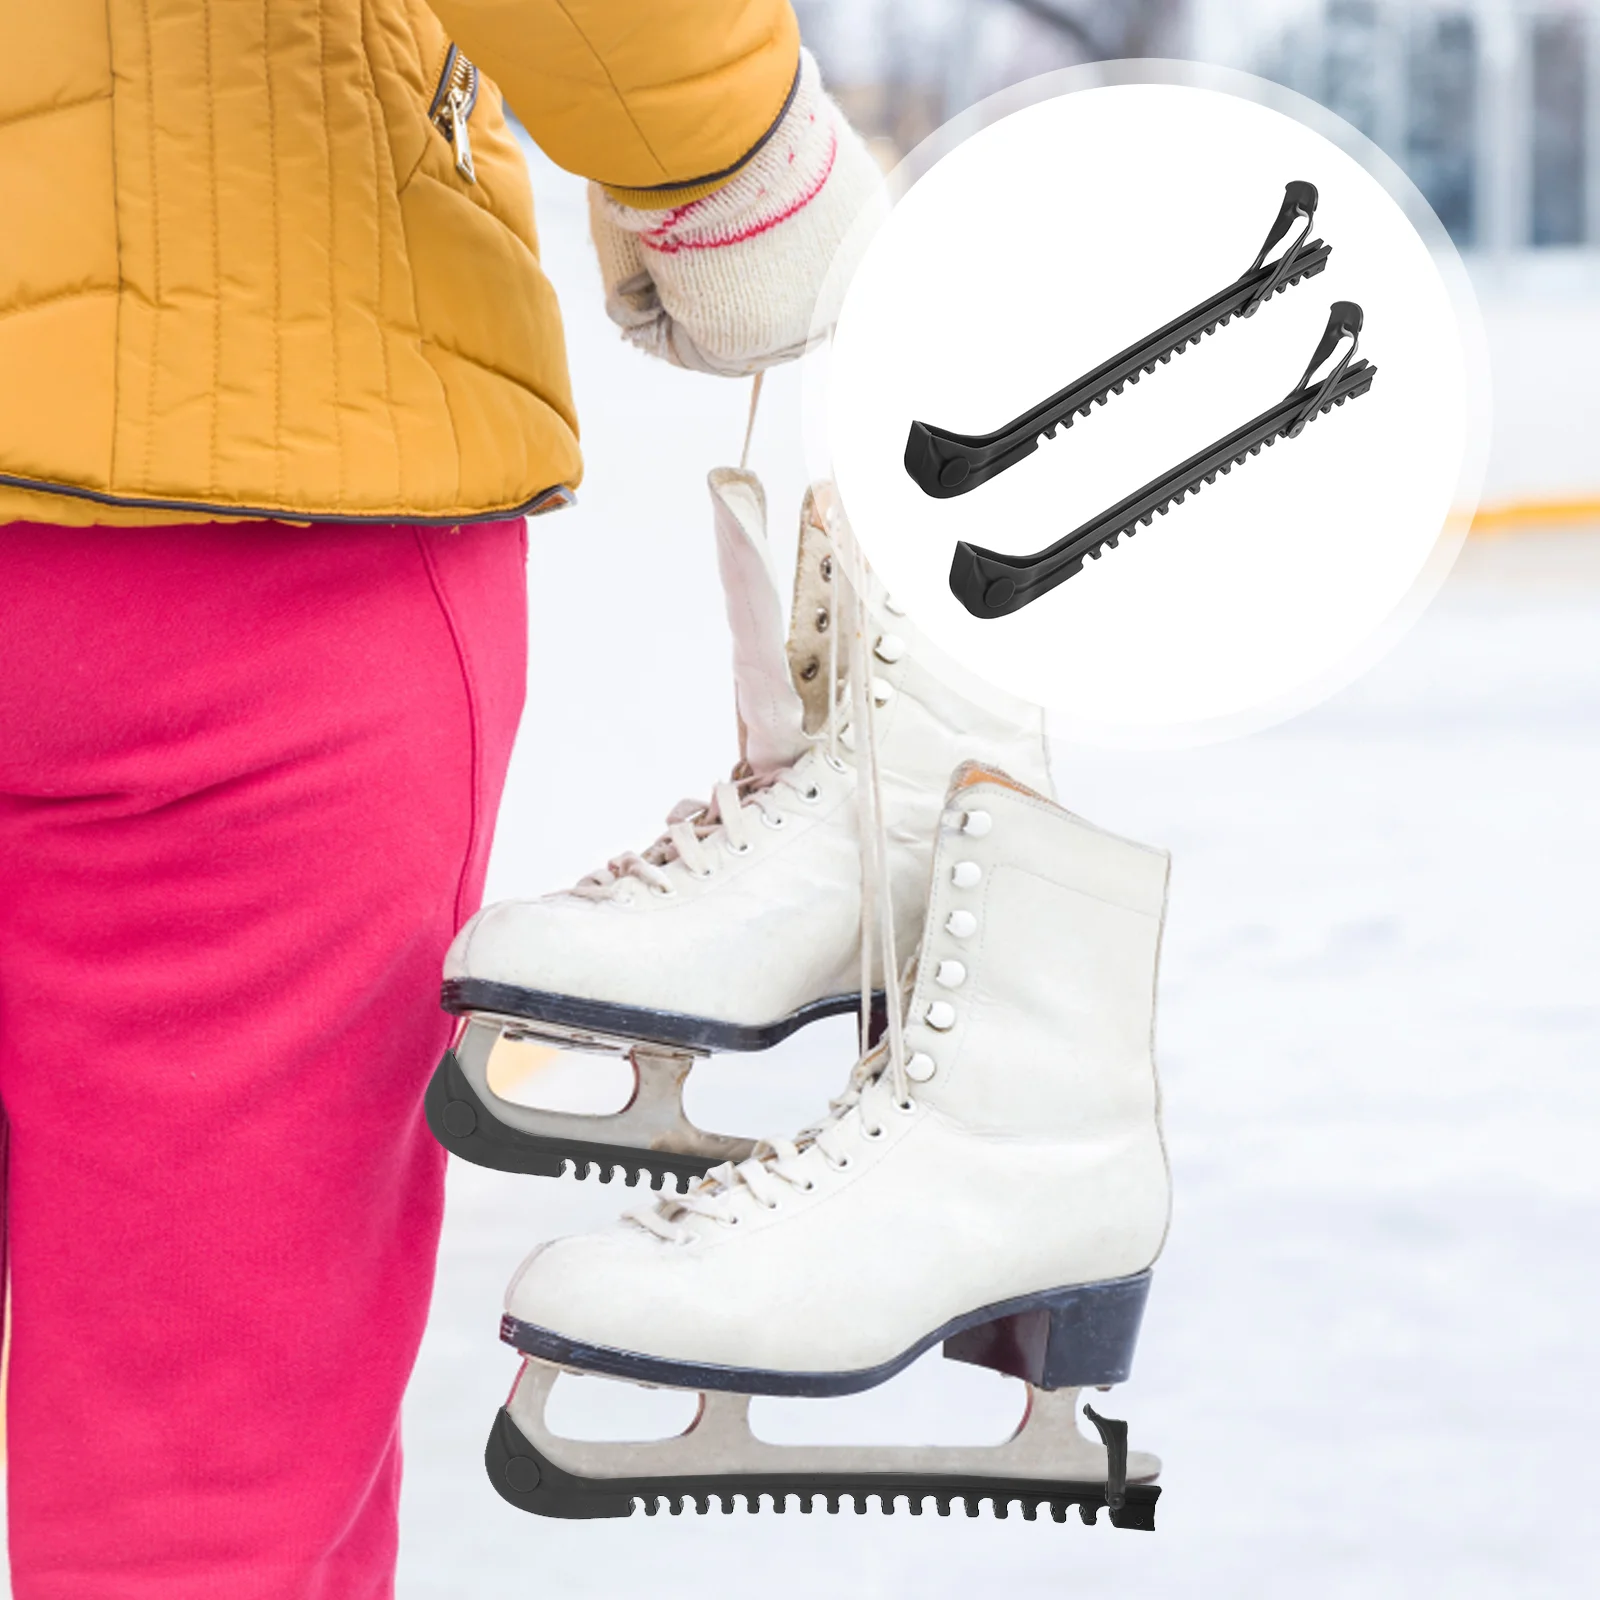 

Ice Skates Guards for Skating Shoe Blades Covers Kids Environmental Protection Pxc Synthesis Protective Case Child Skateboards